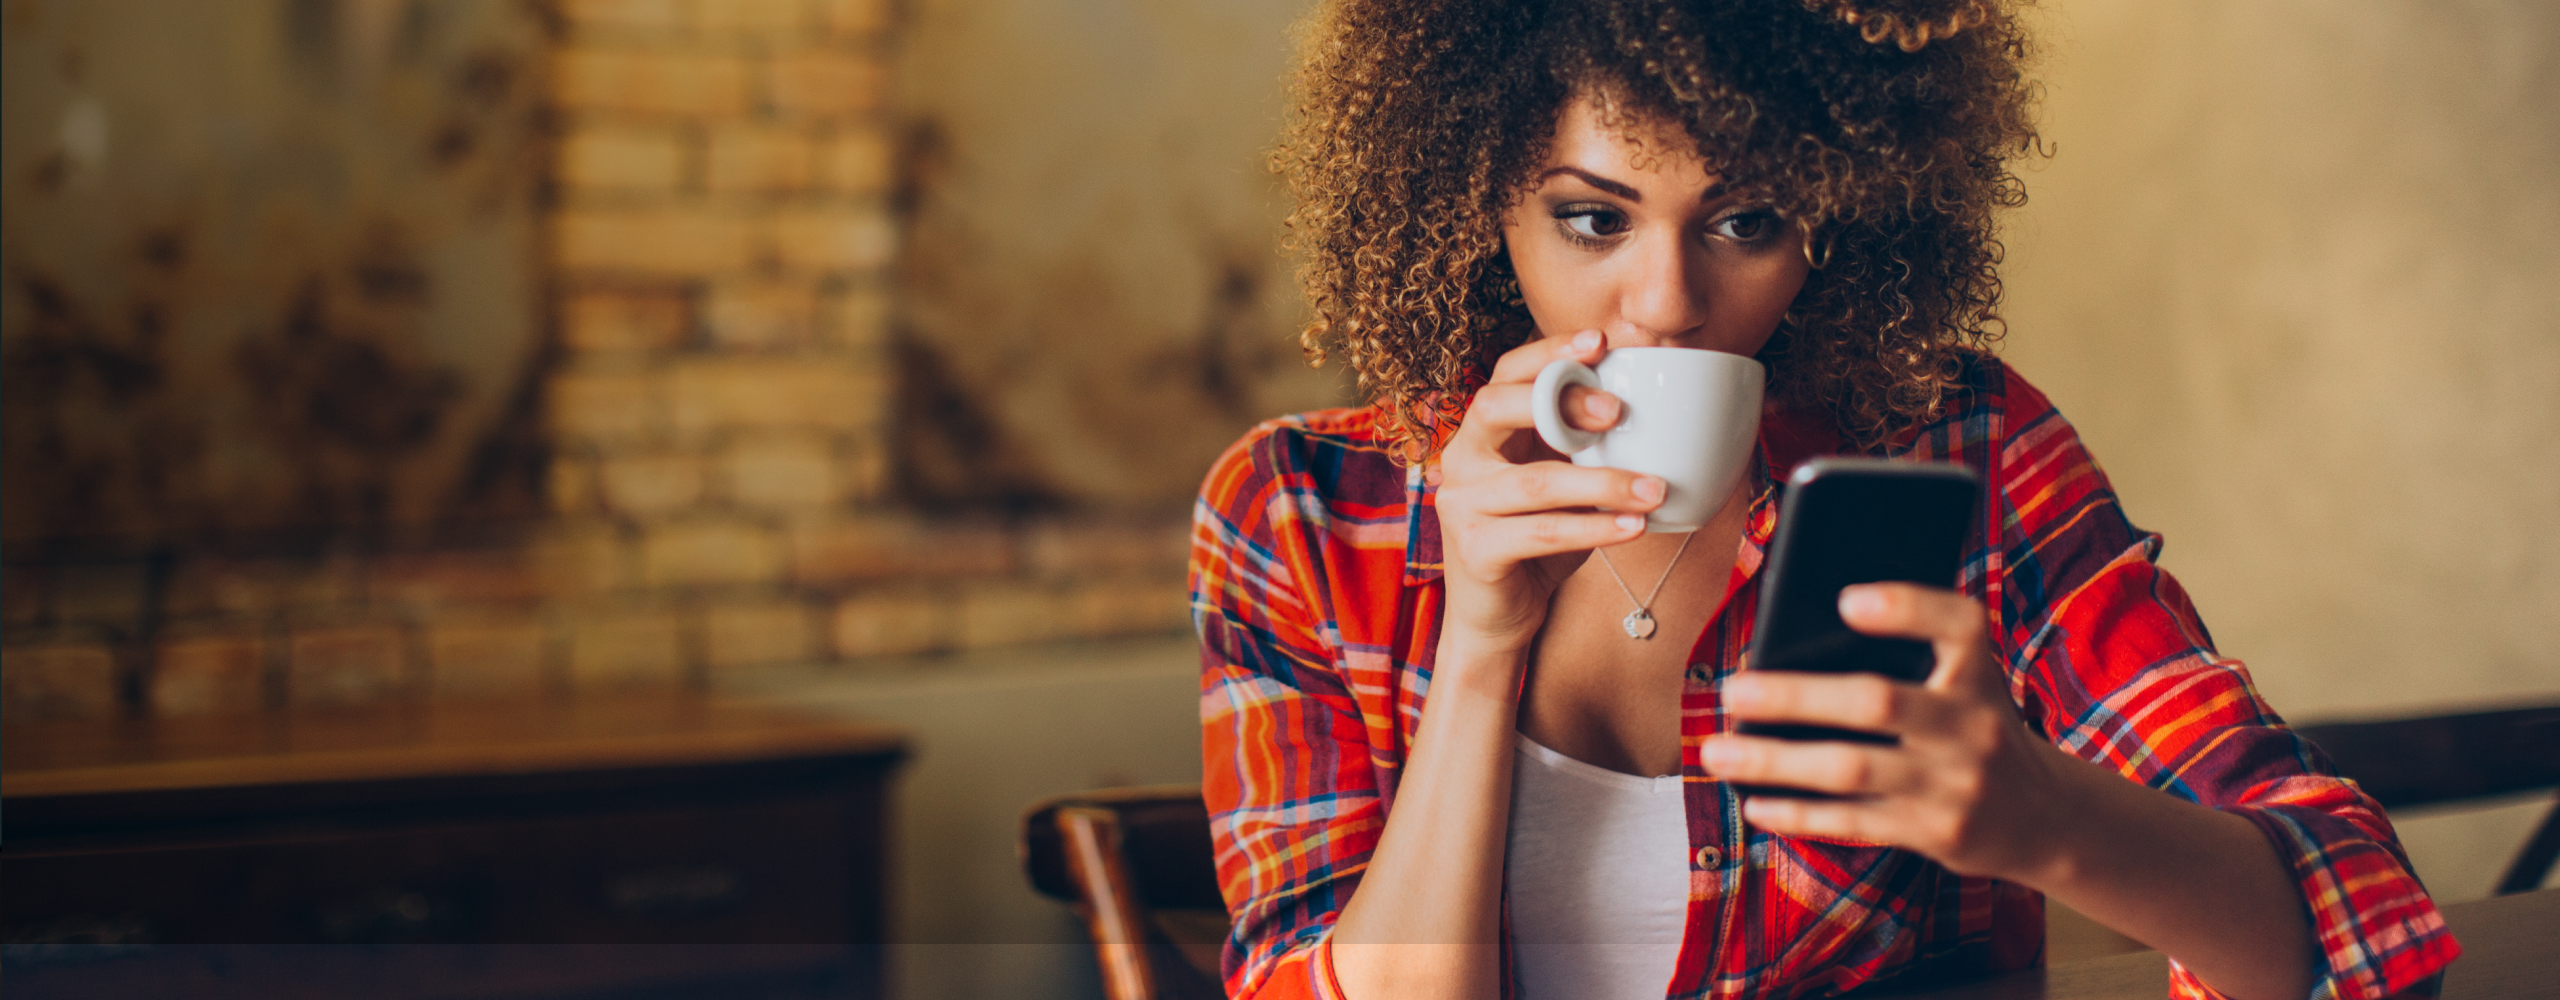 Woman drinking coffee looking at cell phone